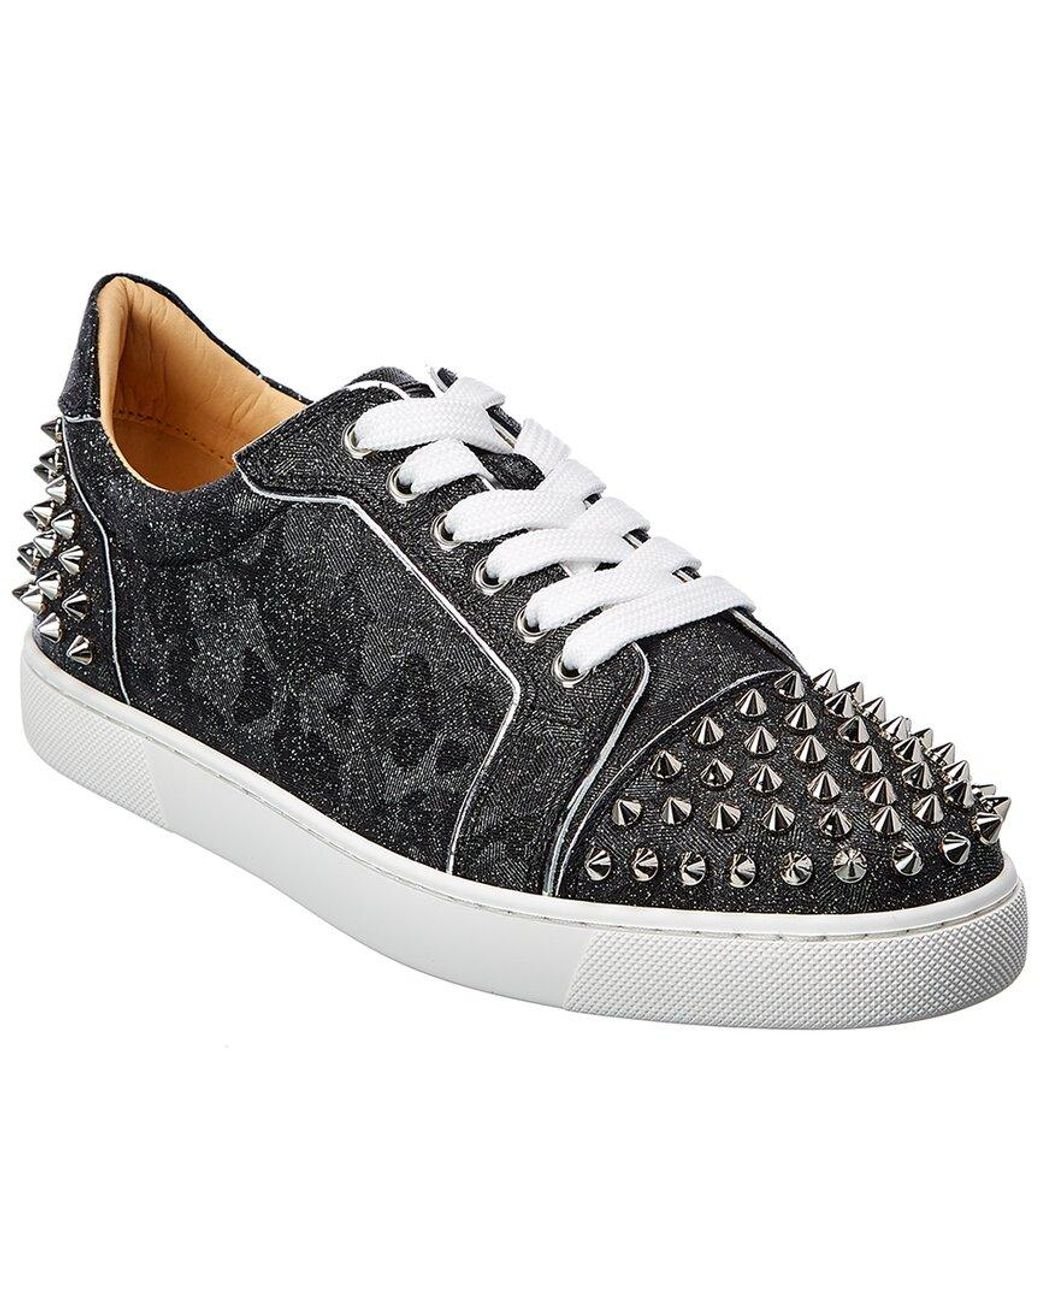 Christian Louboutin Vieira 2 Spikes Leather Sneaker in Black - Lyst